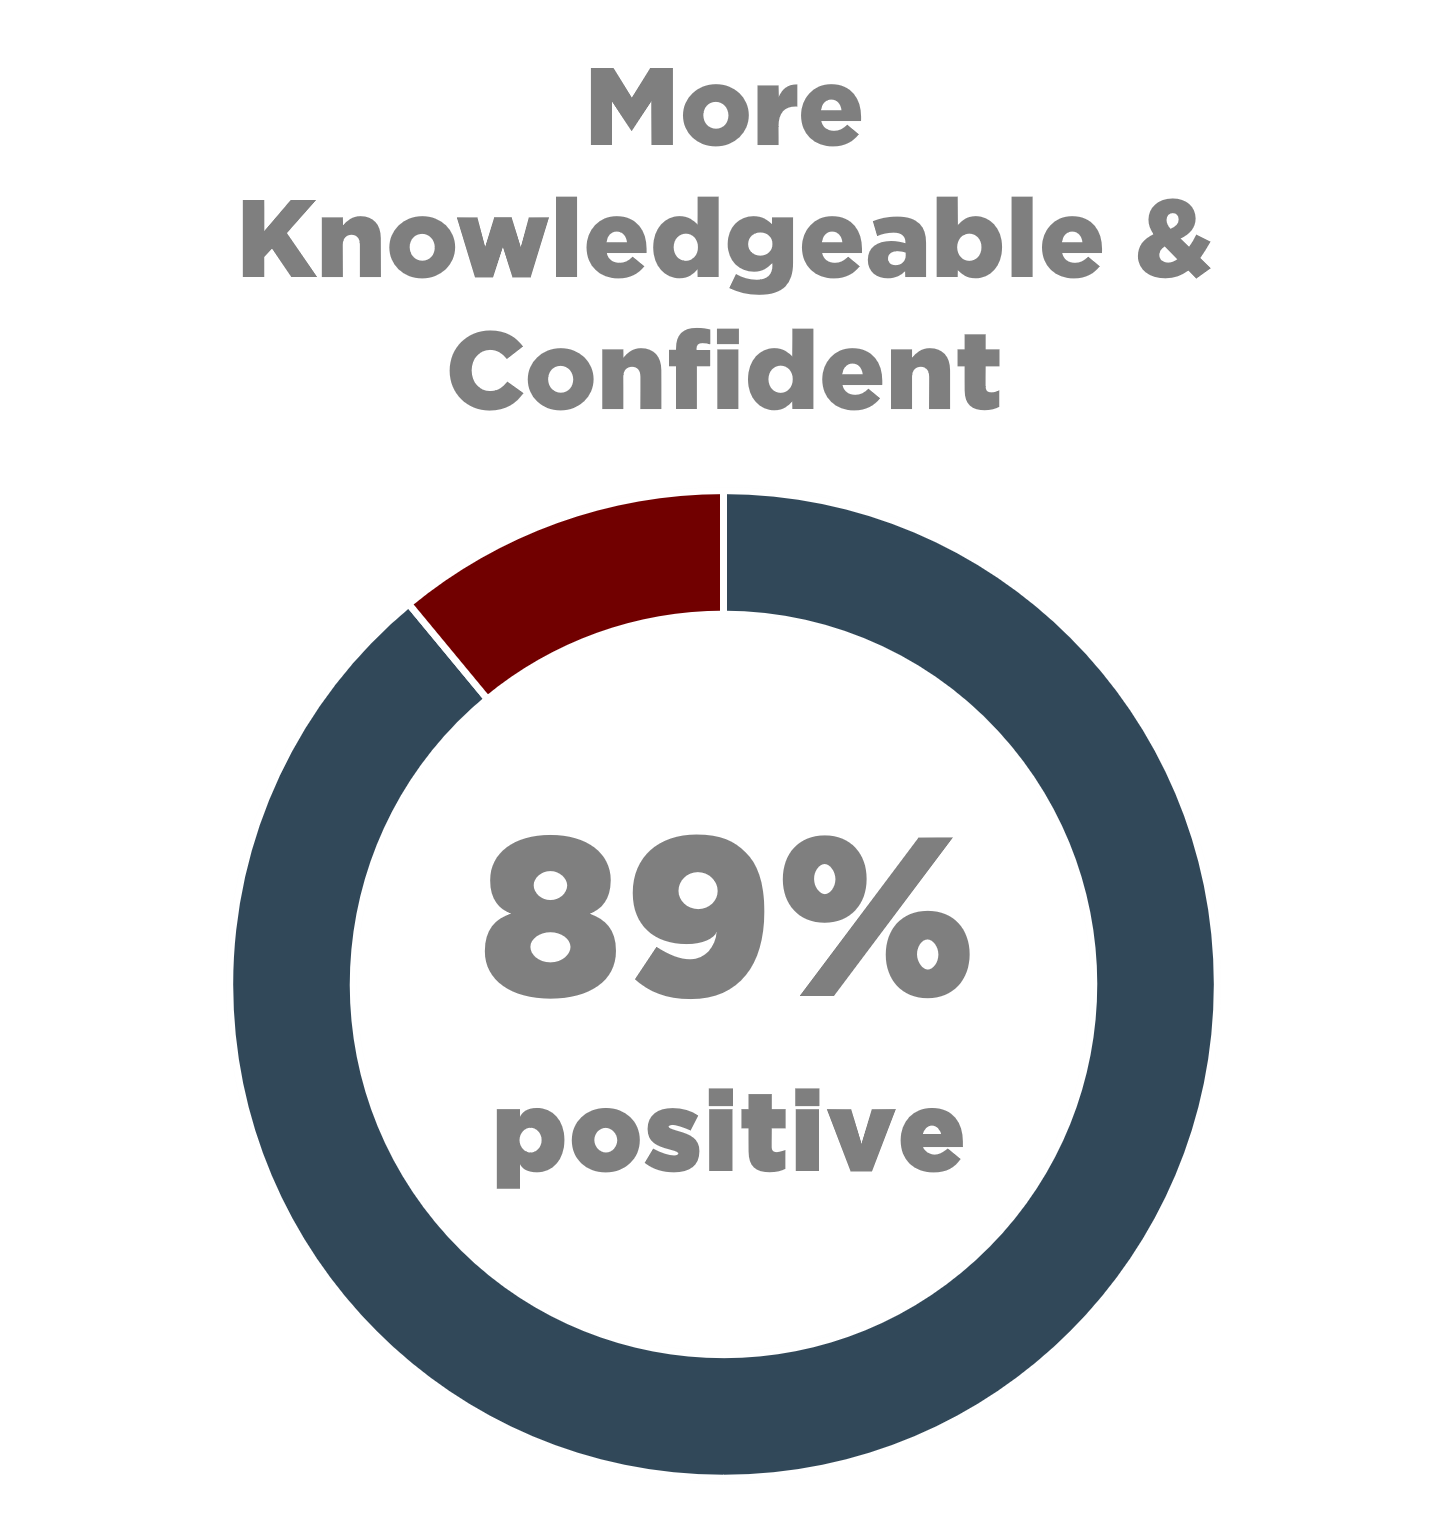 More knowledgeable & confident 89% positive